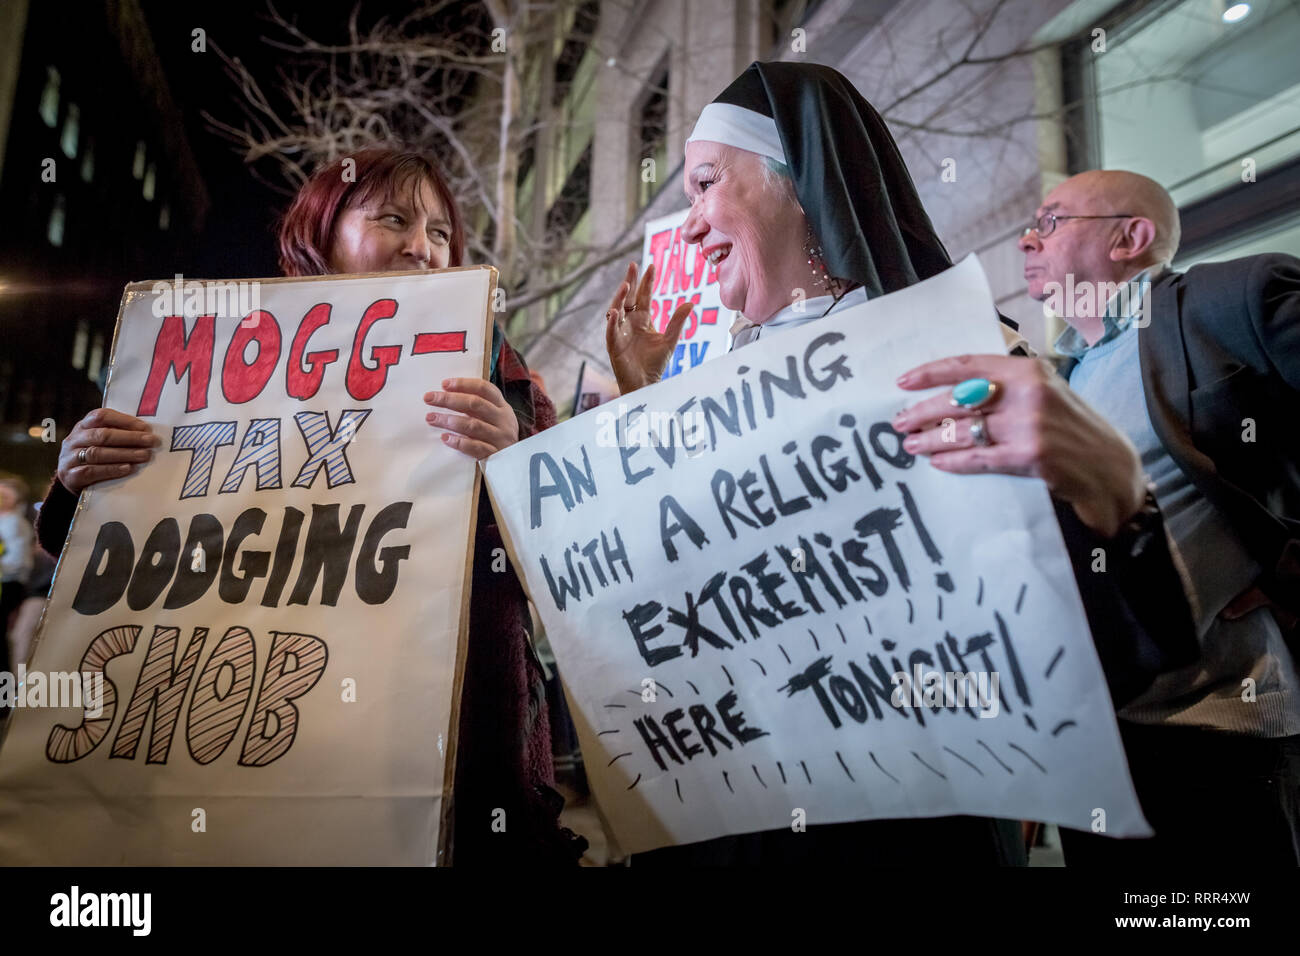 Protesters from Class War anarchist group hold a lively demonstration outside the London Palladium theatre against the evening talk featuring Jacob Rees-Mogg, Conservative MP and prominent Brexit supporter. Class War members, including long-time anarchist, Ian Bone (with megaphone), Jane Nicholl (pictured dressed as a nun) and Adam Clifford (as Rees-Mogg parody) claim Mr Rees-Mogg, a Catholic, is a religious extremist because of his outspoken views on abortion. Stock Photo